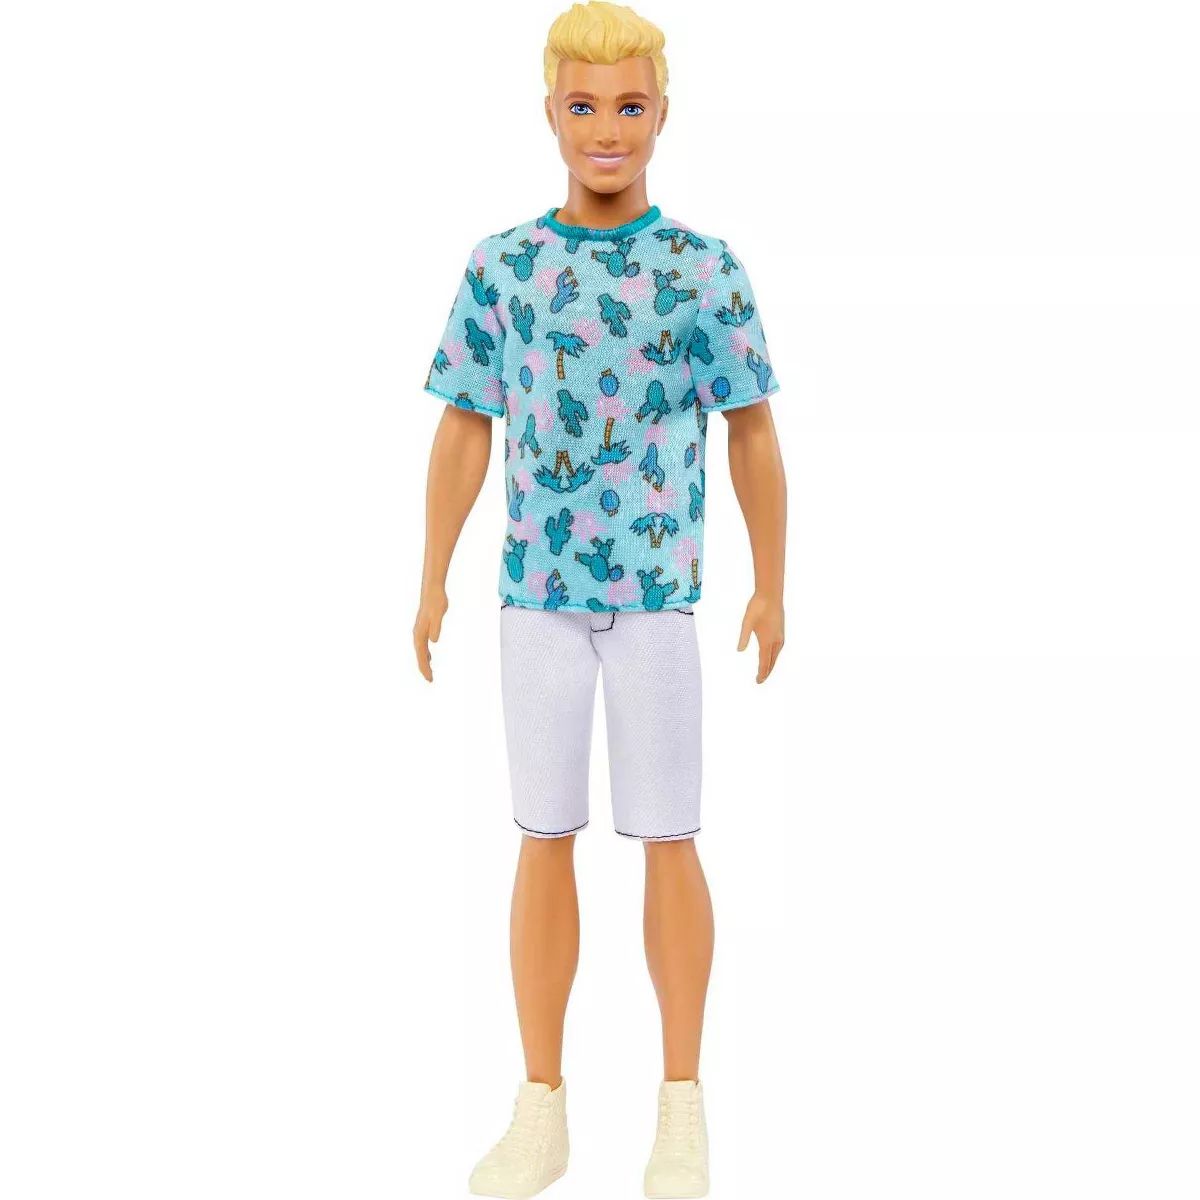 Barbie Ken Fashionistas Doll #211 with Blond Hair and Cactus Tee | Target